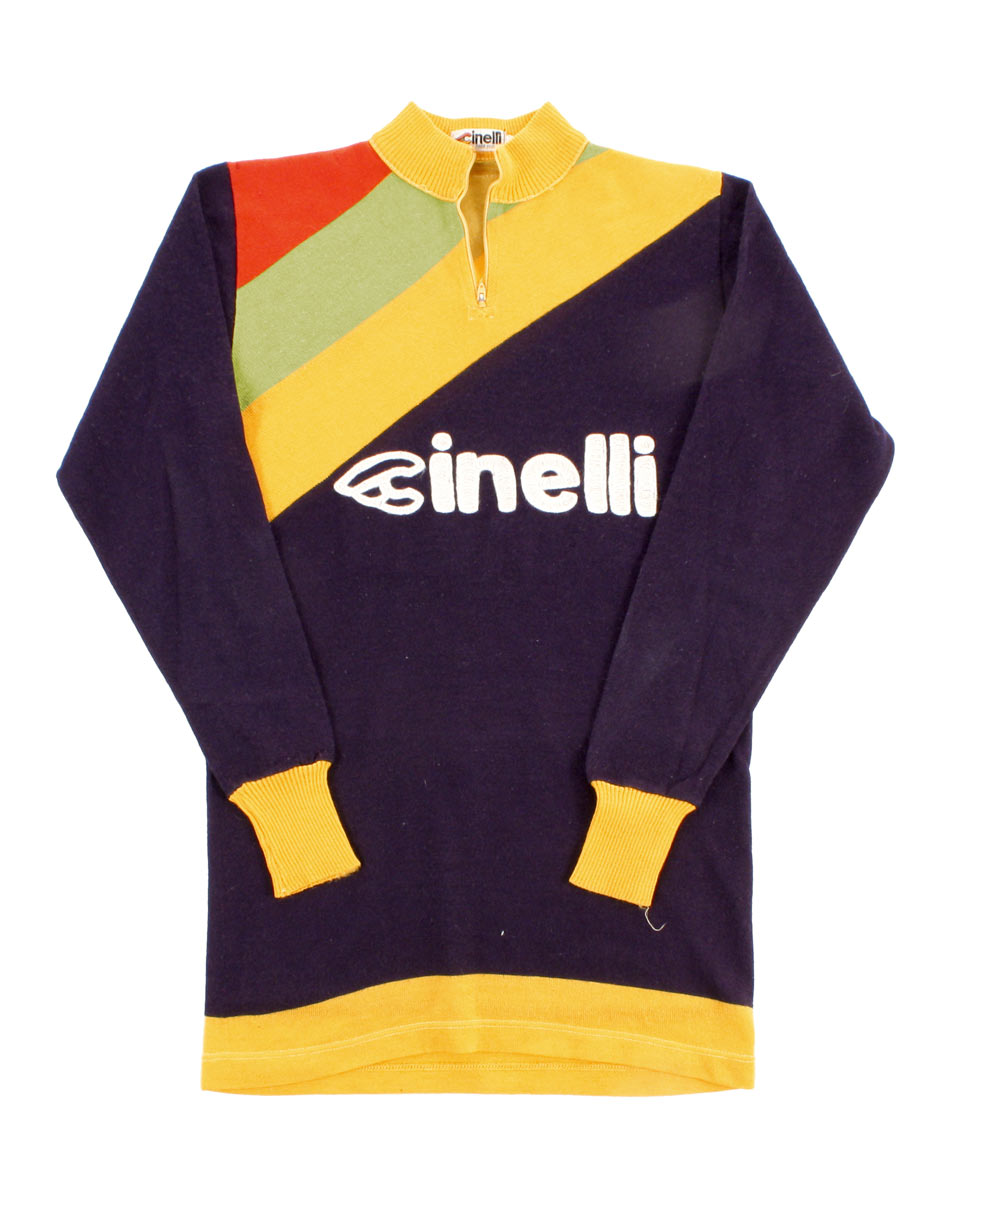 Italy Cinelli Cycling Wool t-shirt 60/70s